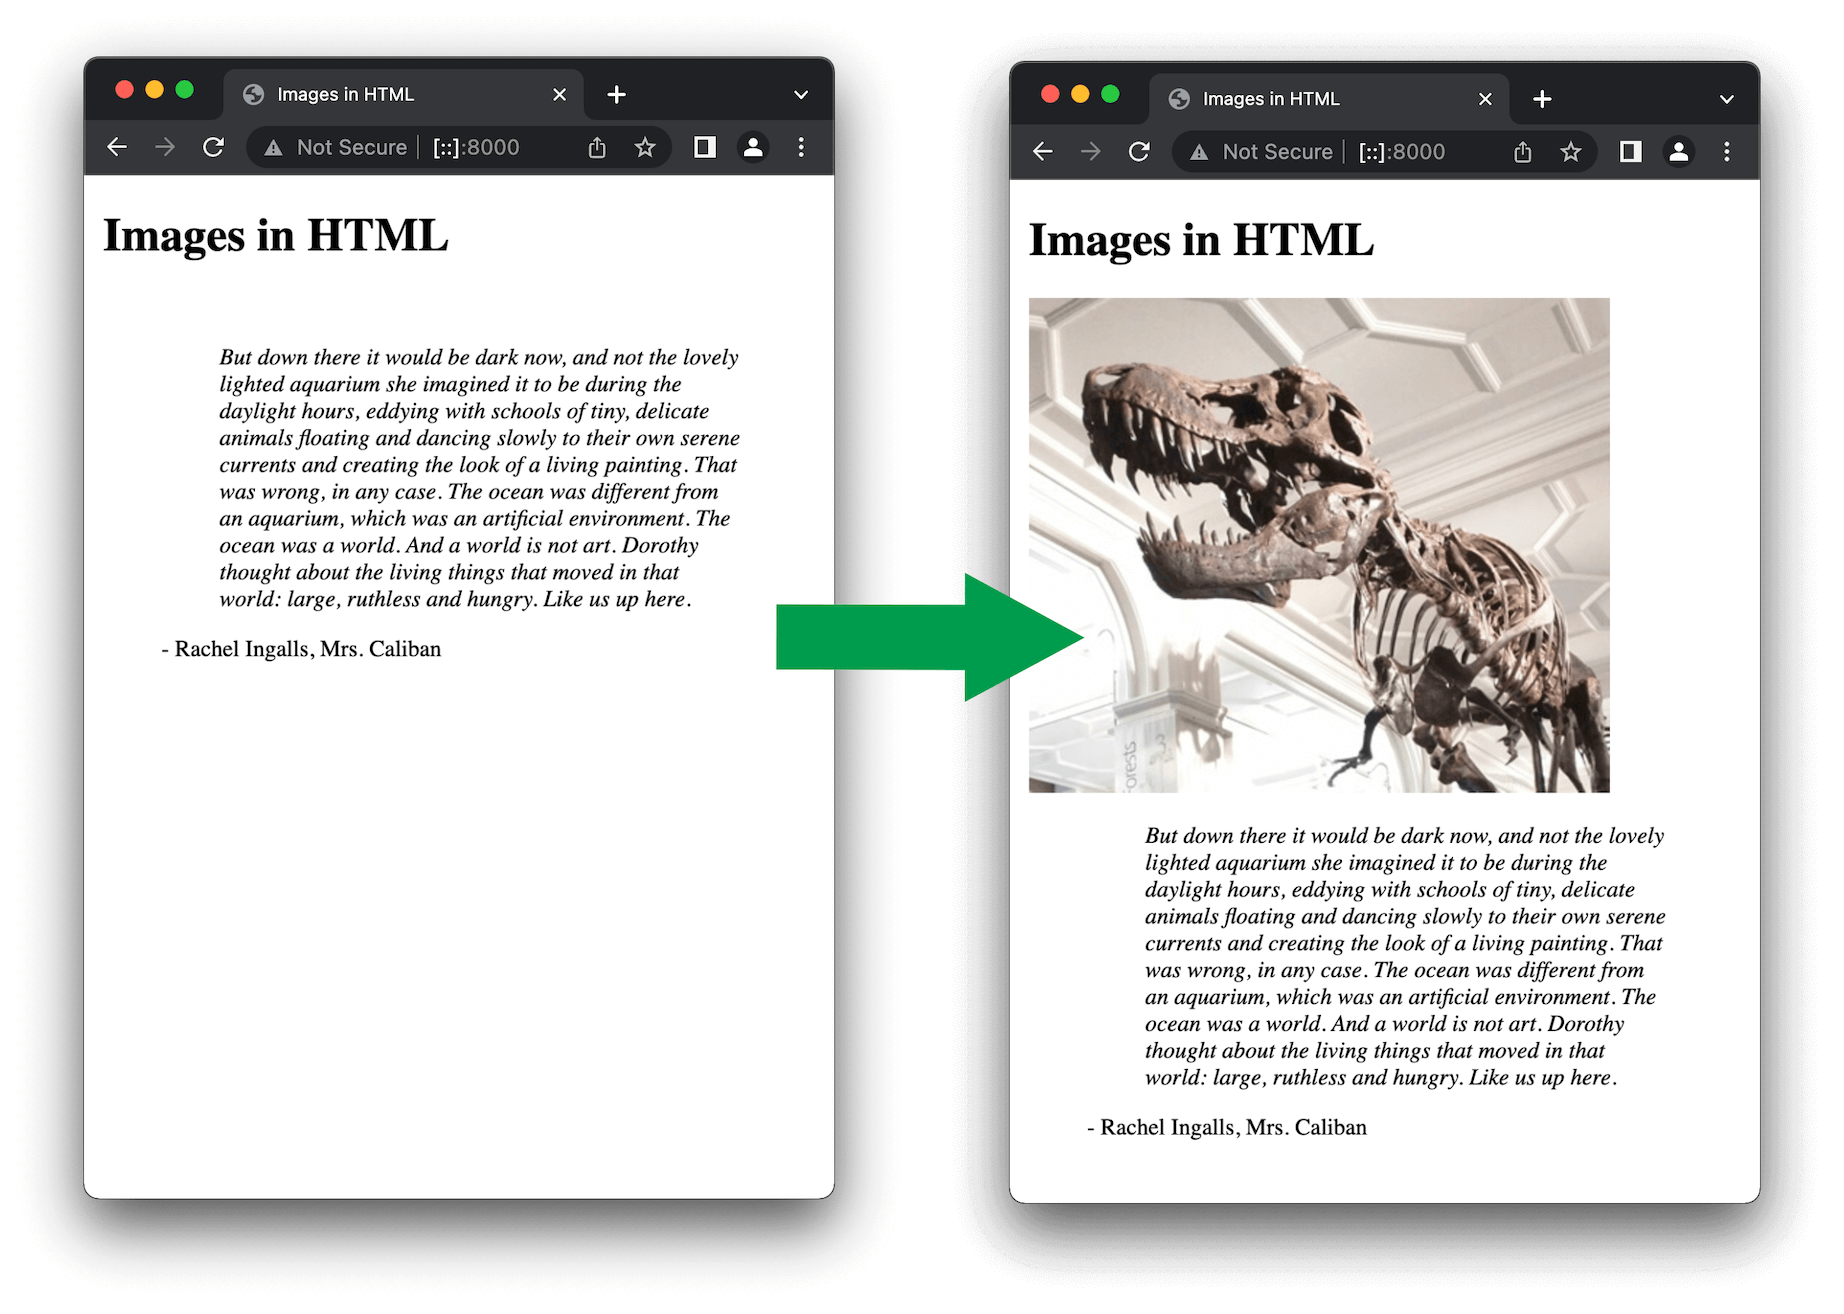 Comparison of page layout while the browser is loading a page and when it has finished, when no size is specified for the image.